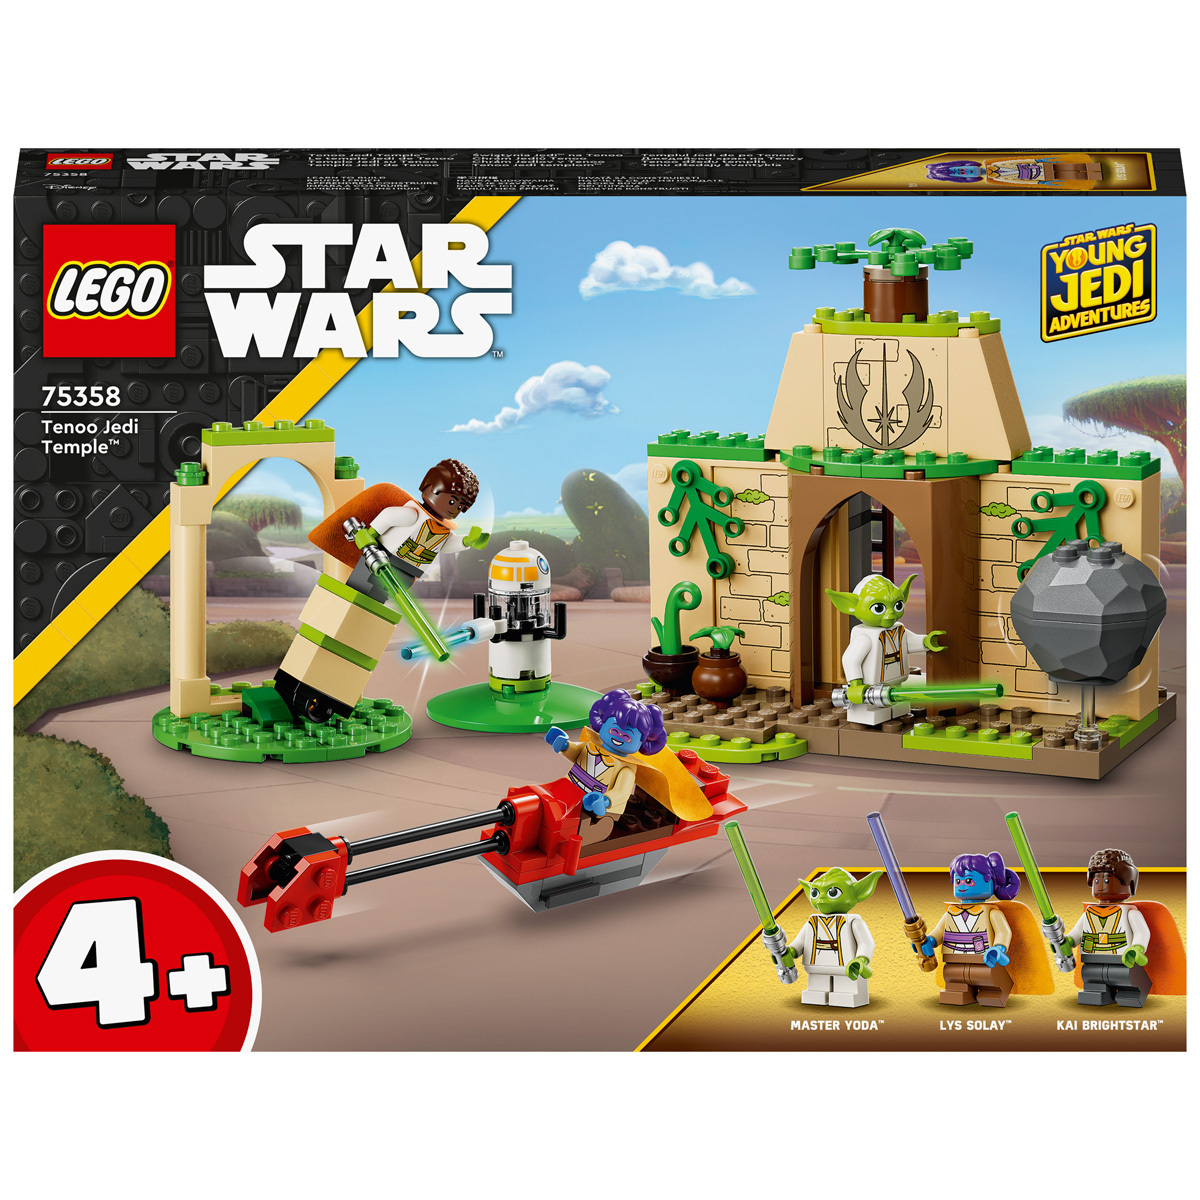 Target offers Star Wars Last Jedi LEGO sets at new all-time lows